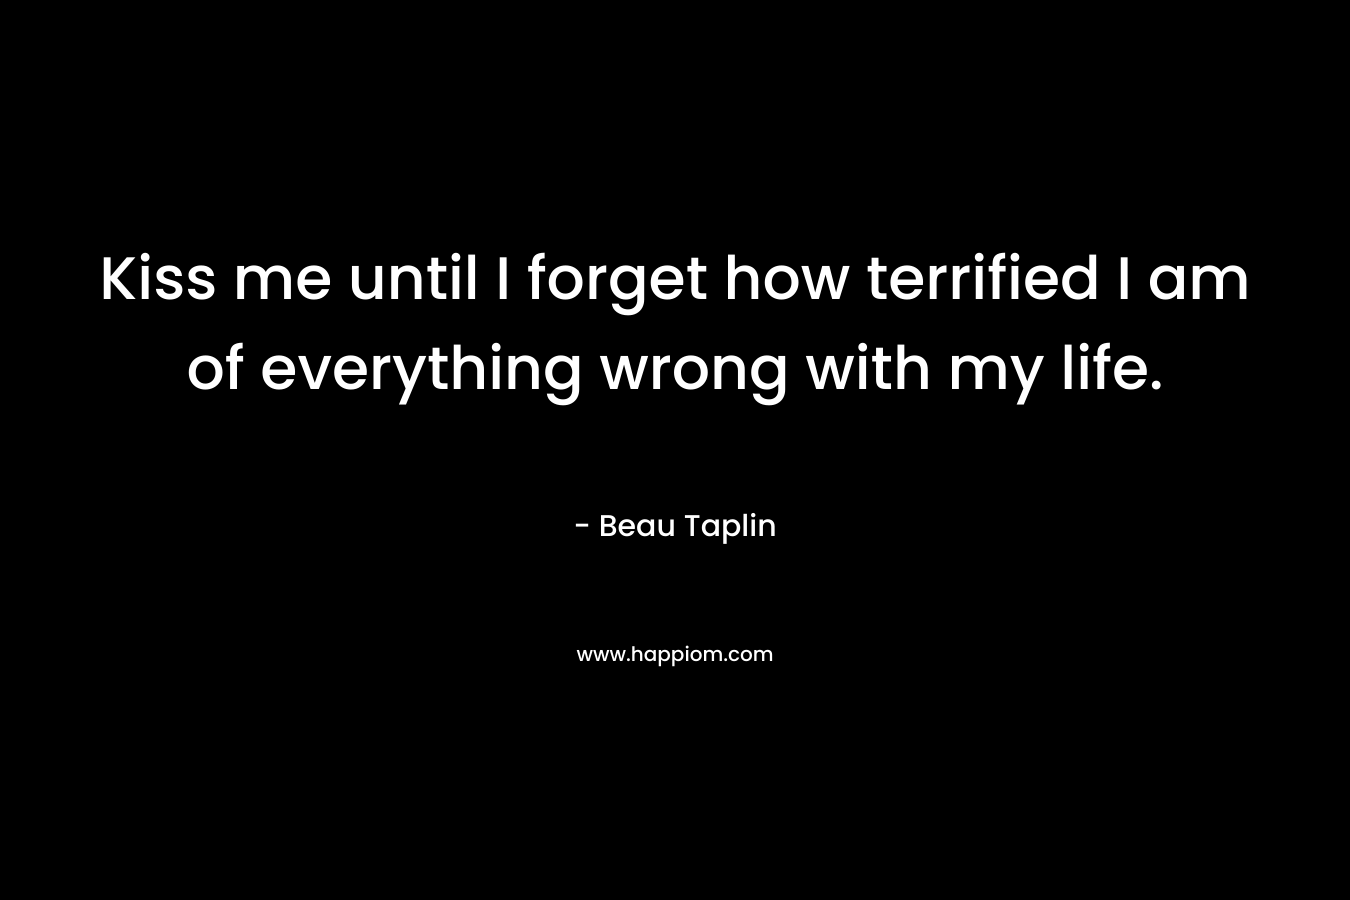 Kiss me until I forget how terrified I am of everything wrong with my life. – Beau Taplin